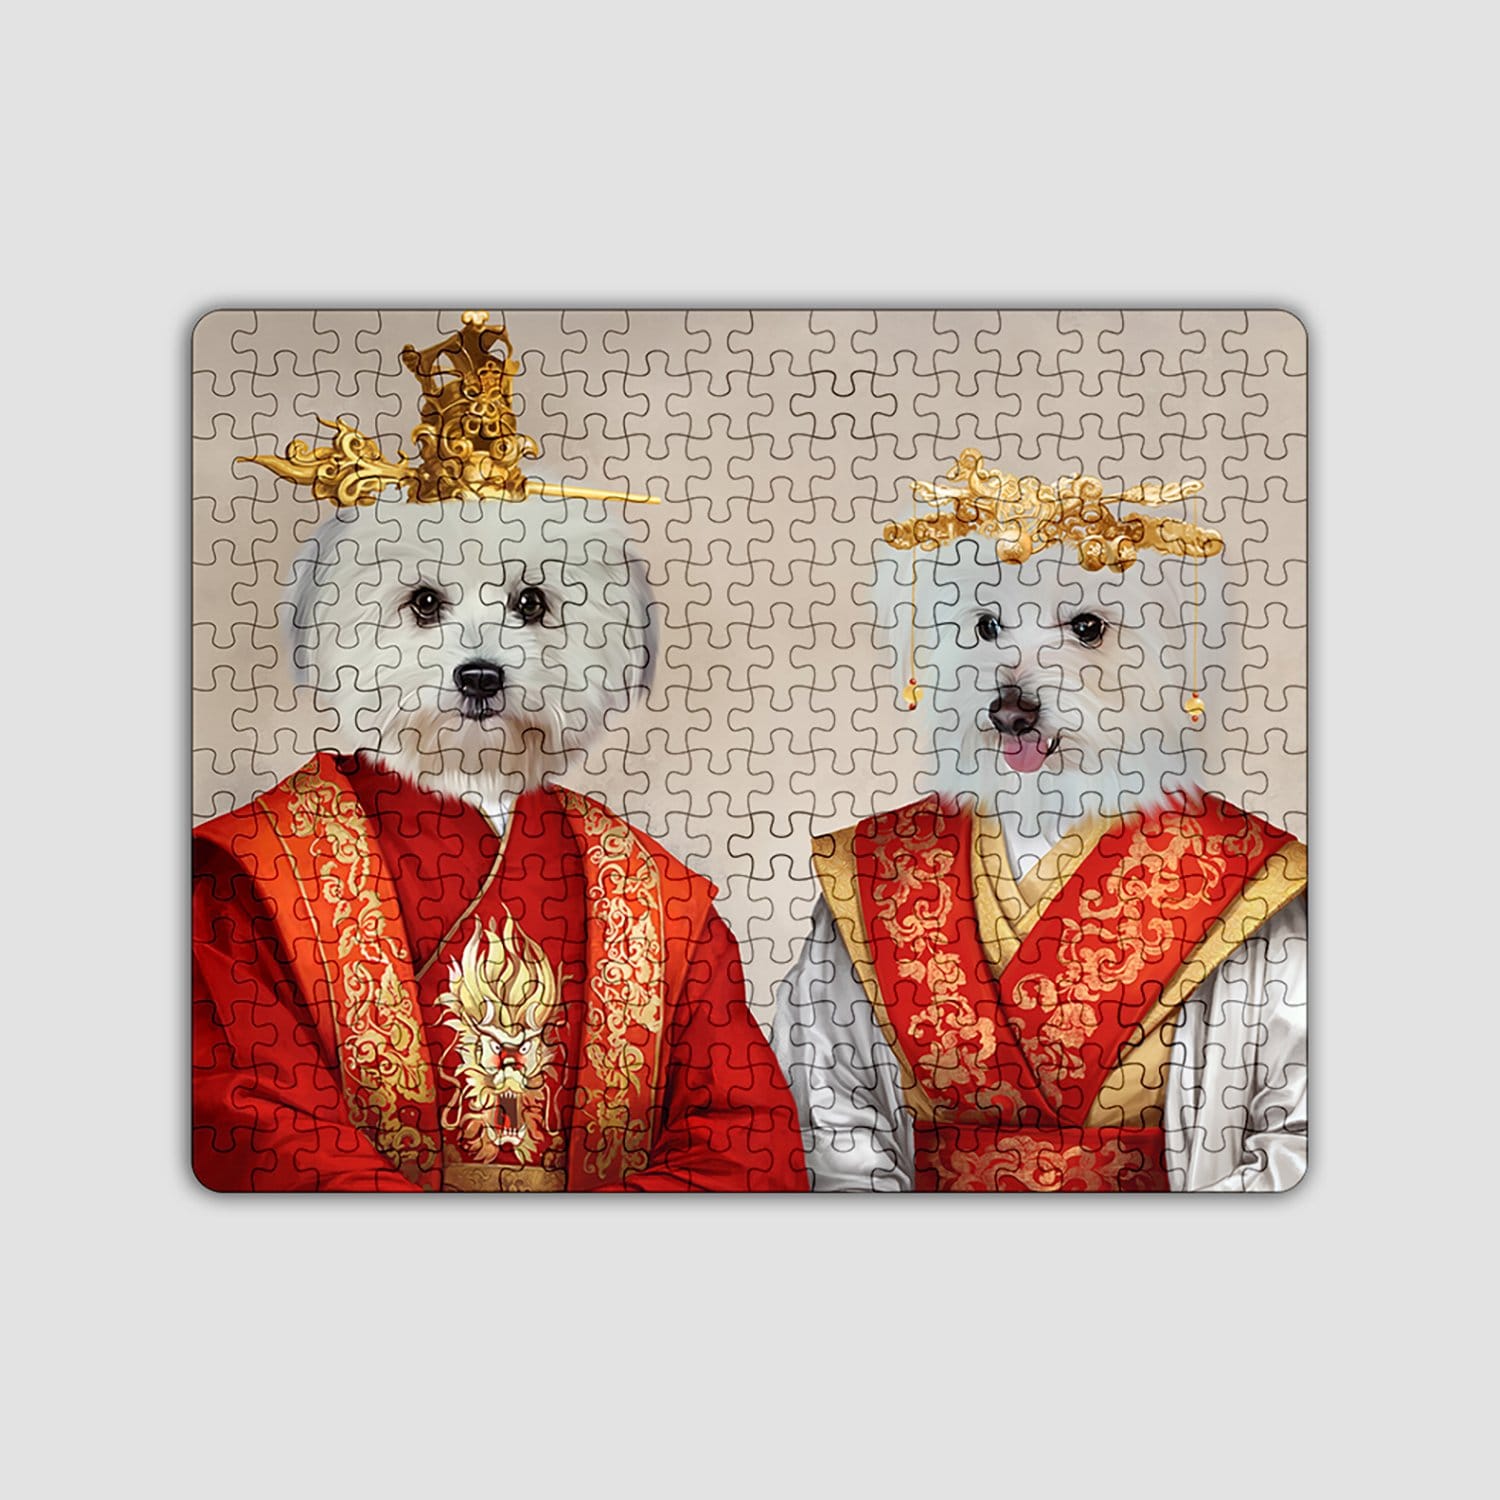 The Asian Rulers - Custom Puzzle